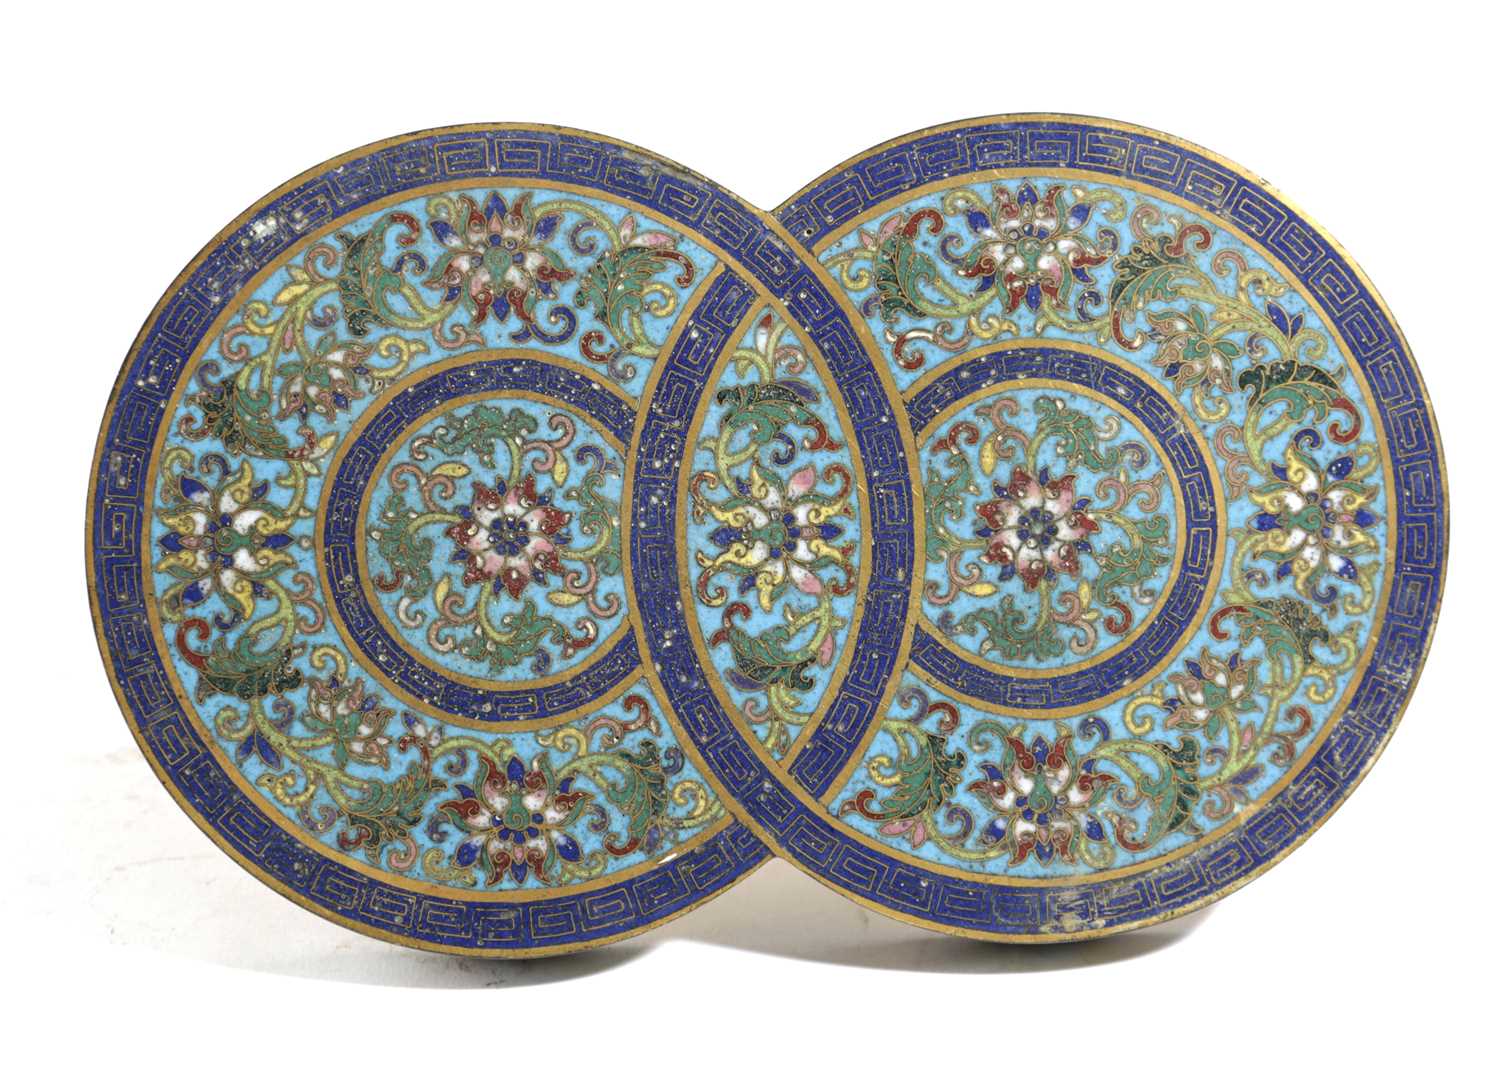 A CHINESE CLOISONNE COVER 18TH / 19TH CENTURY formed as two interlinked circles, decorated with - Image 7 of 7